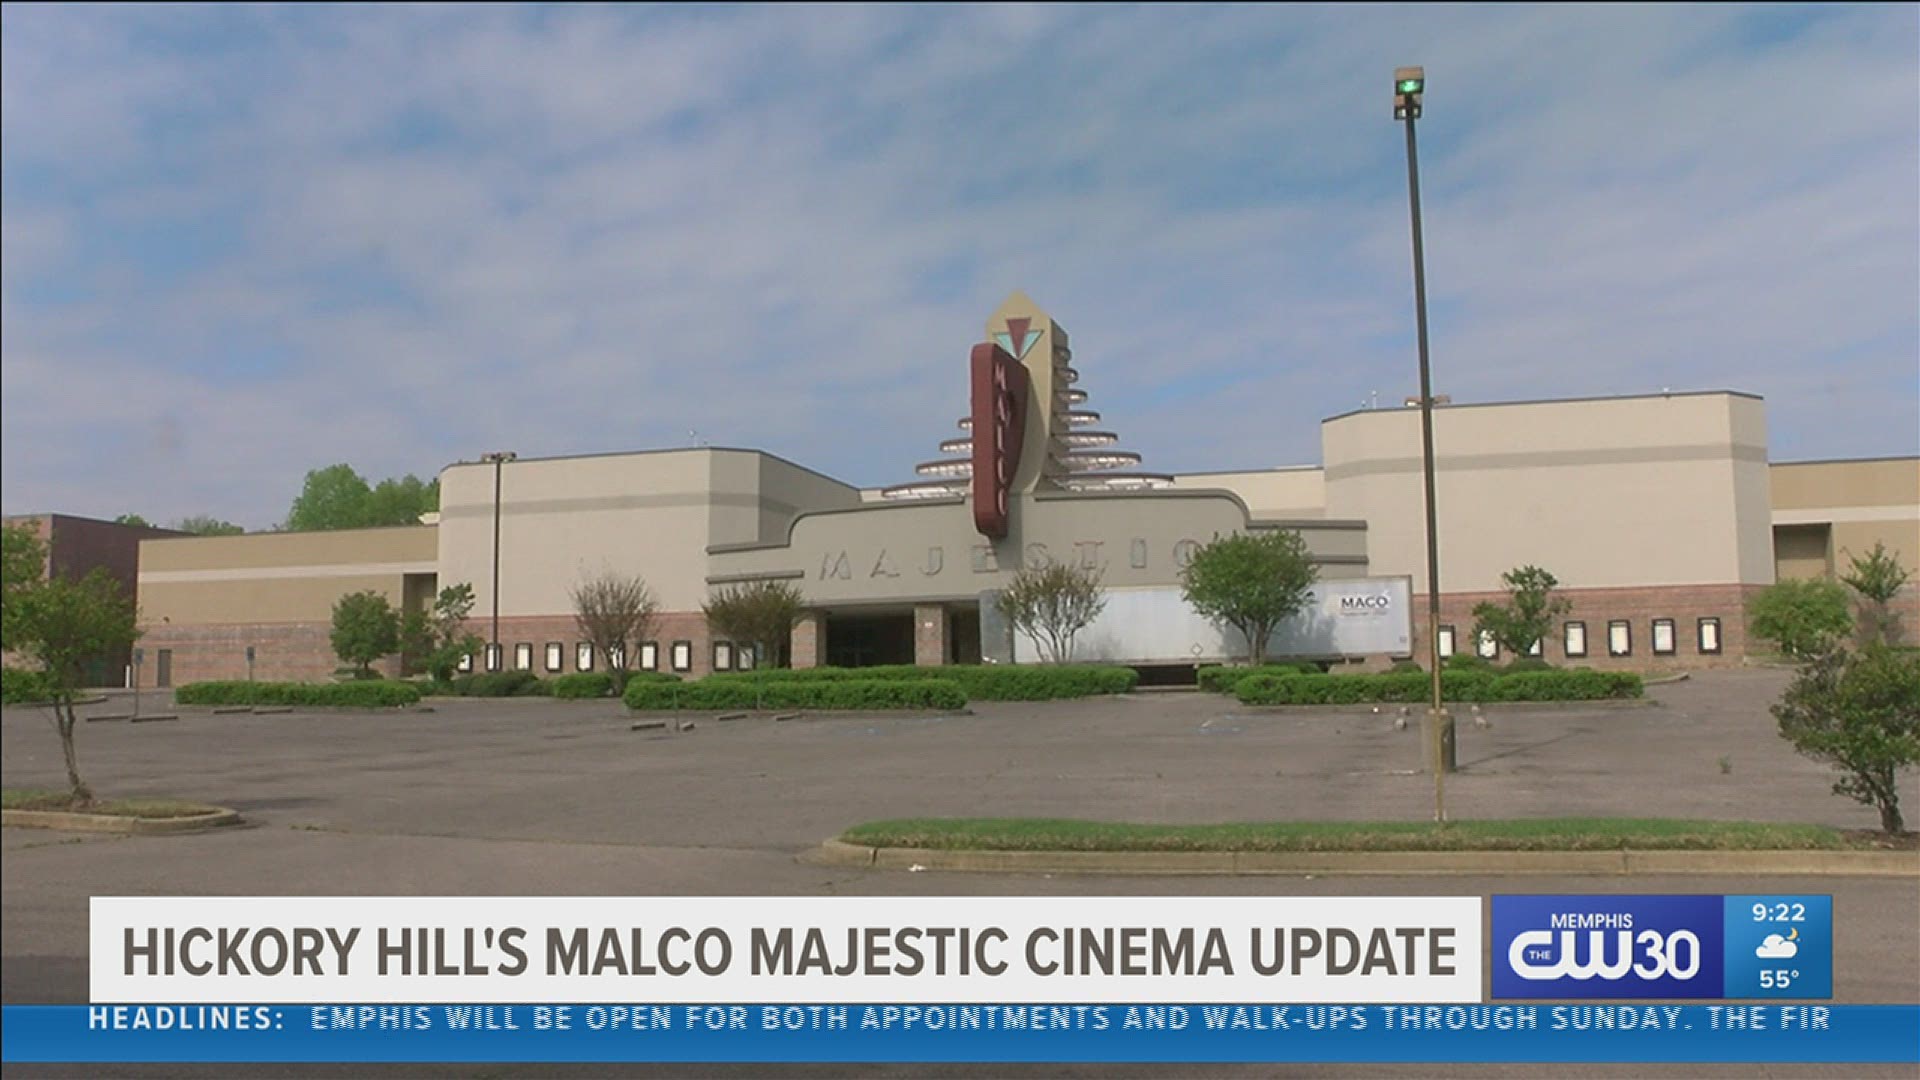 Malco Majestic Cinema receiving a new look